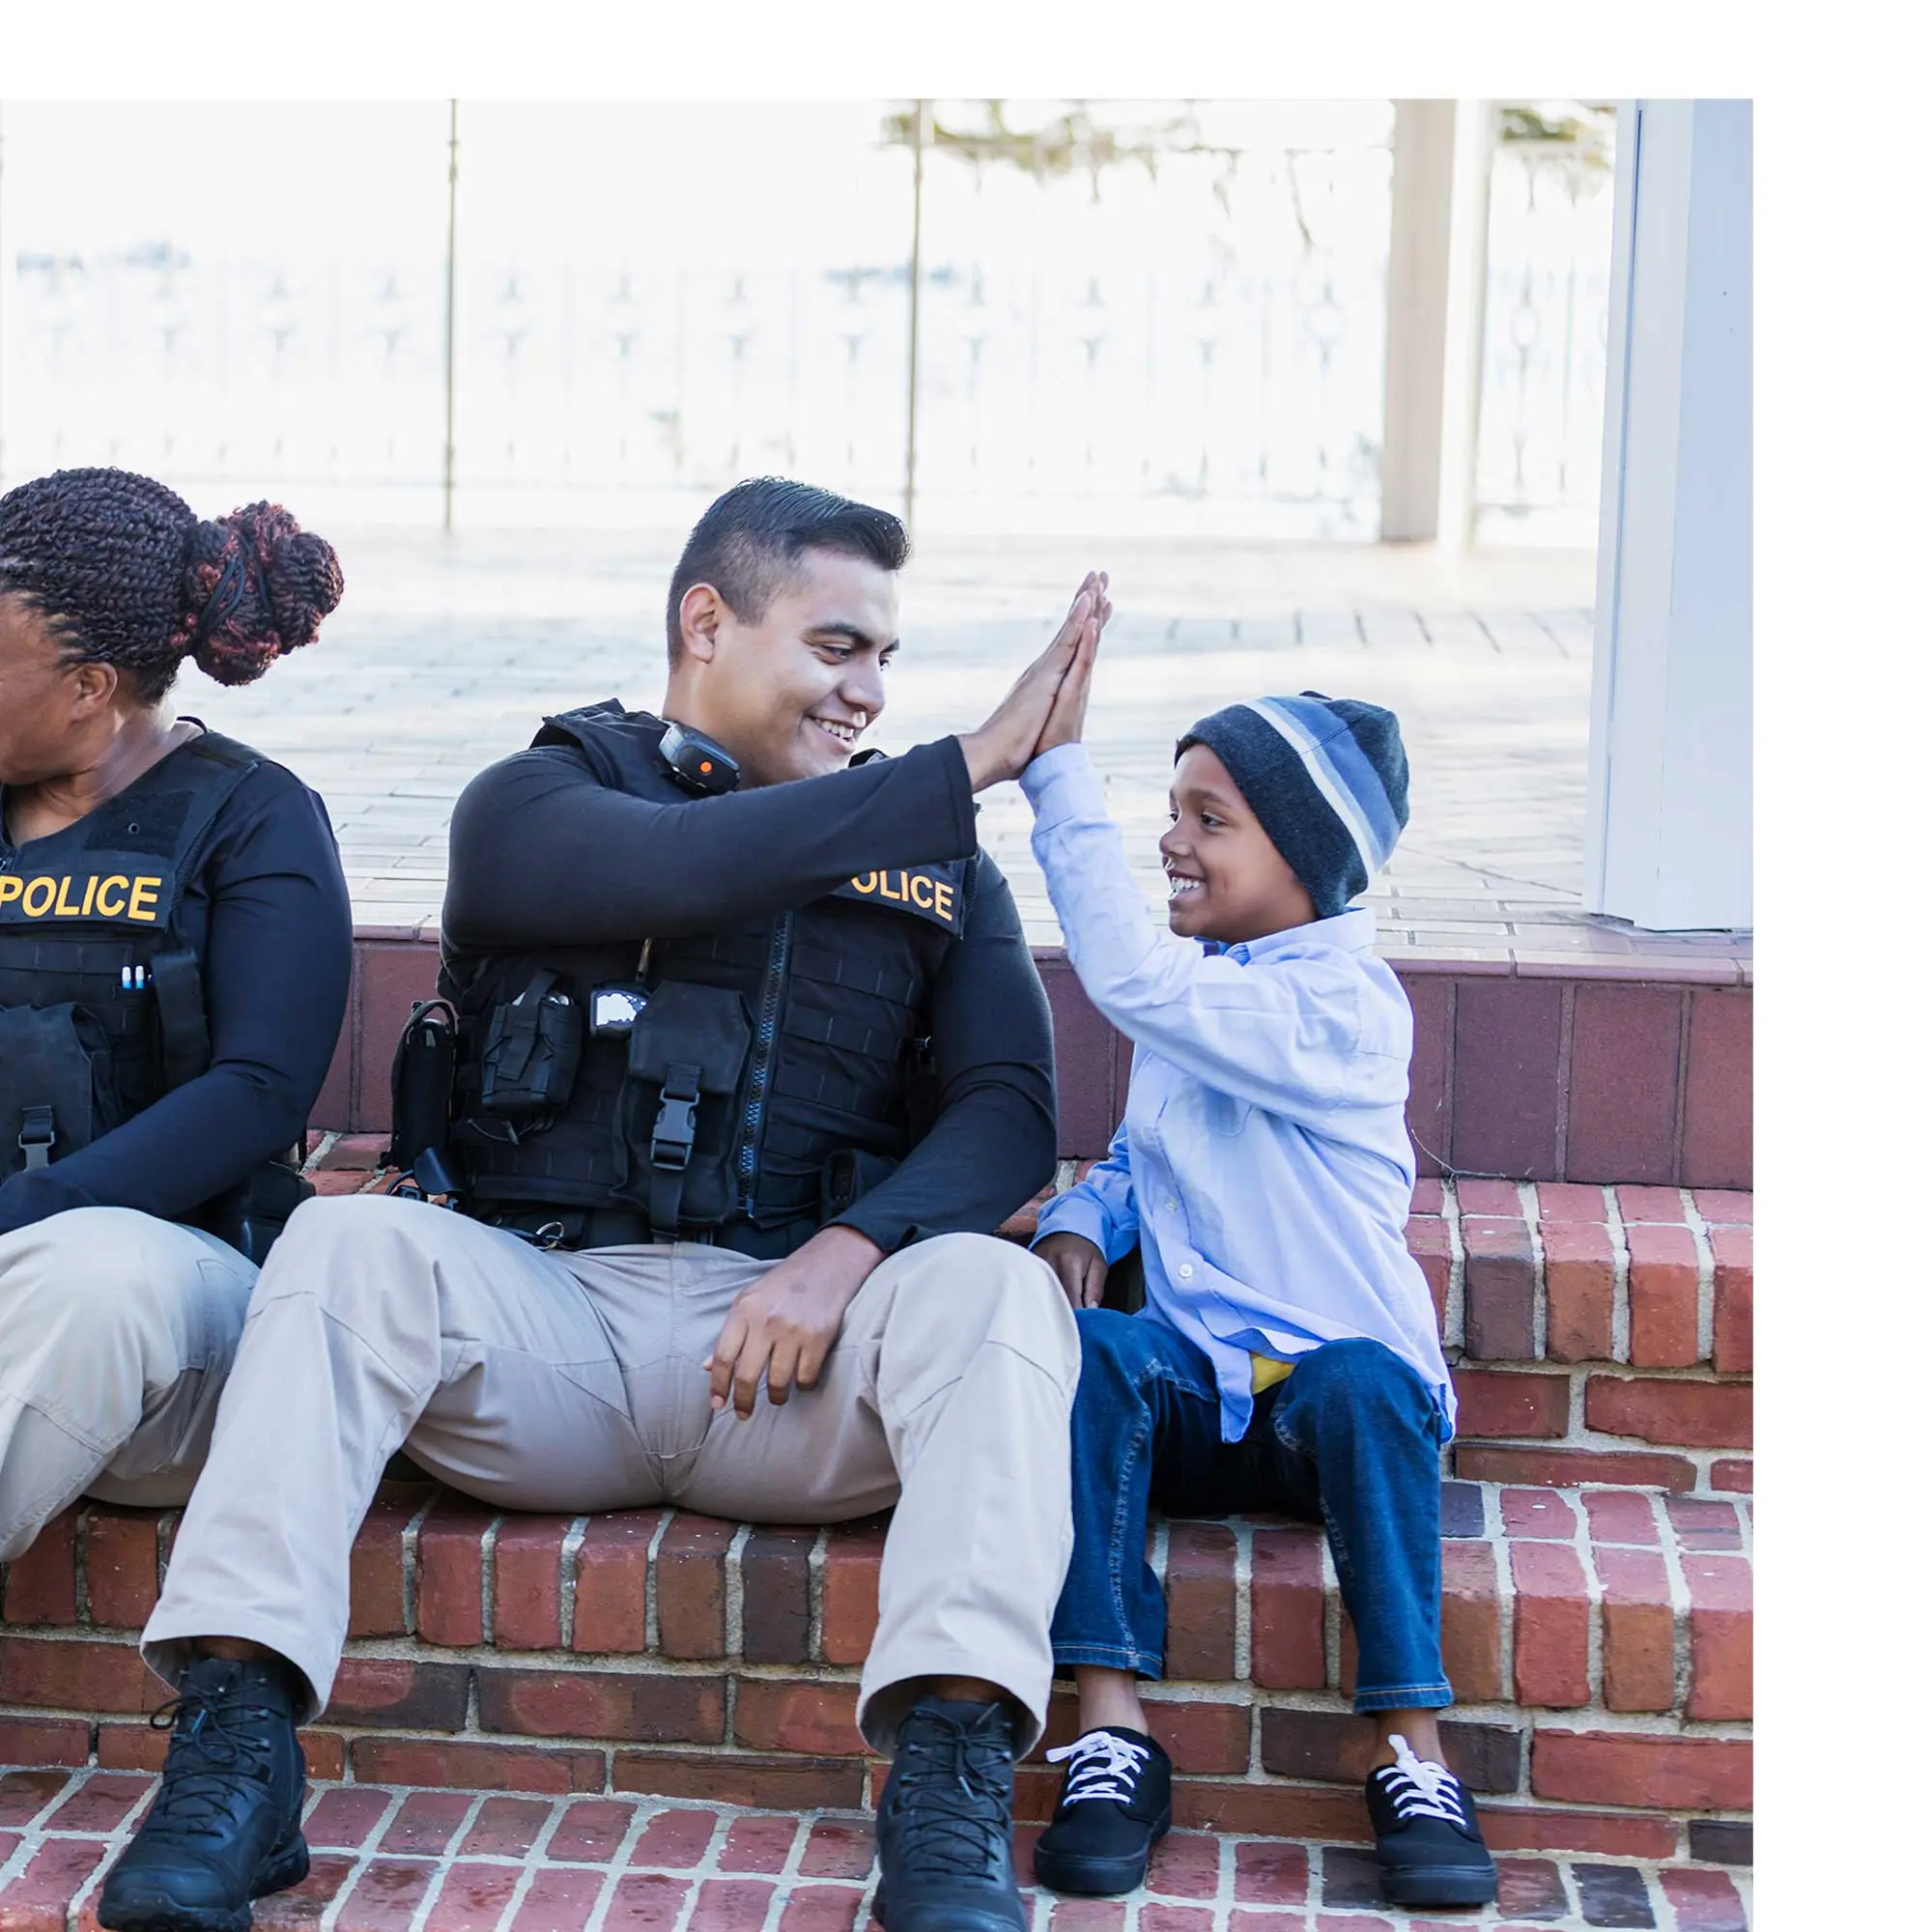 A police officer high-fiving a kid in his community on the steps of a building.